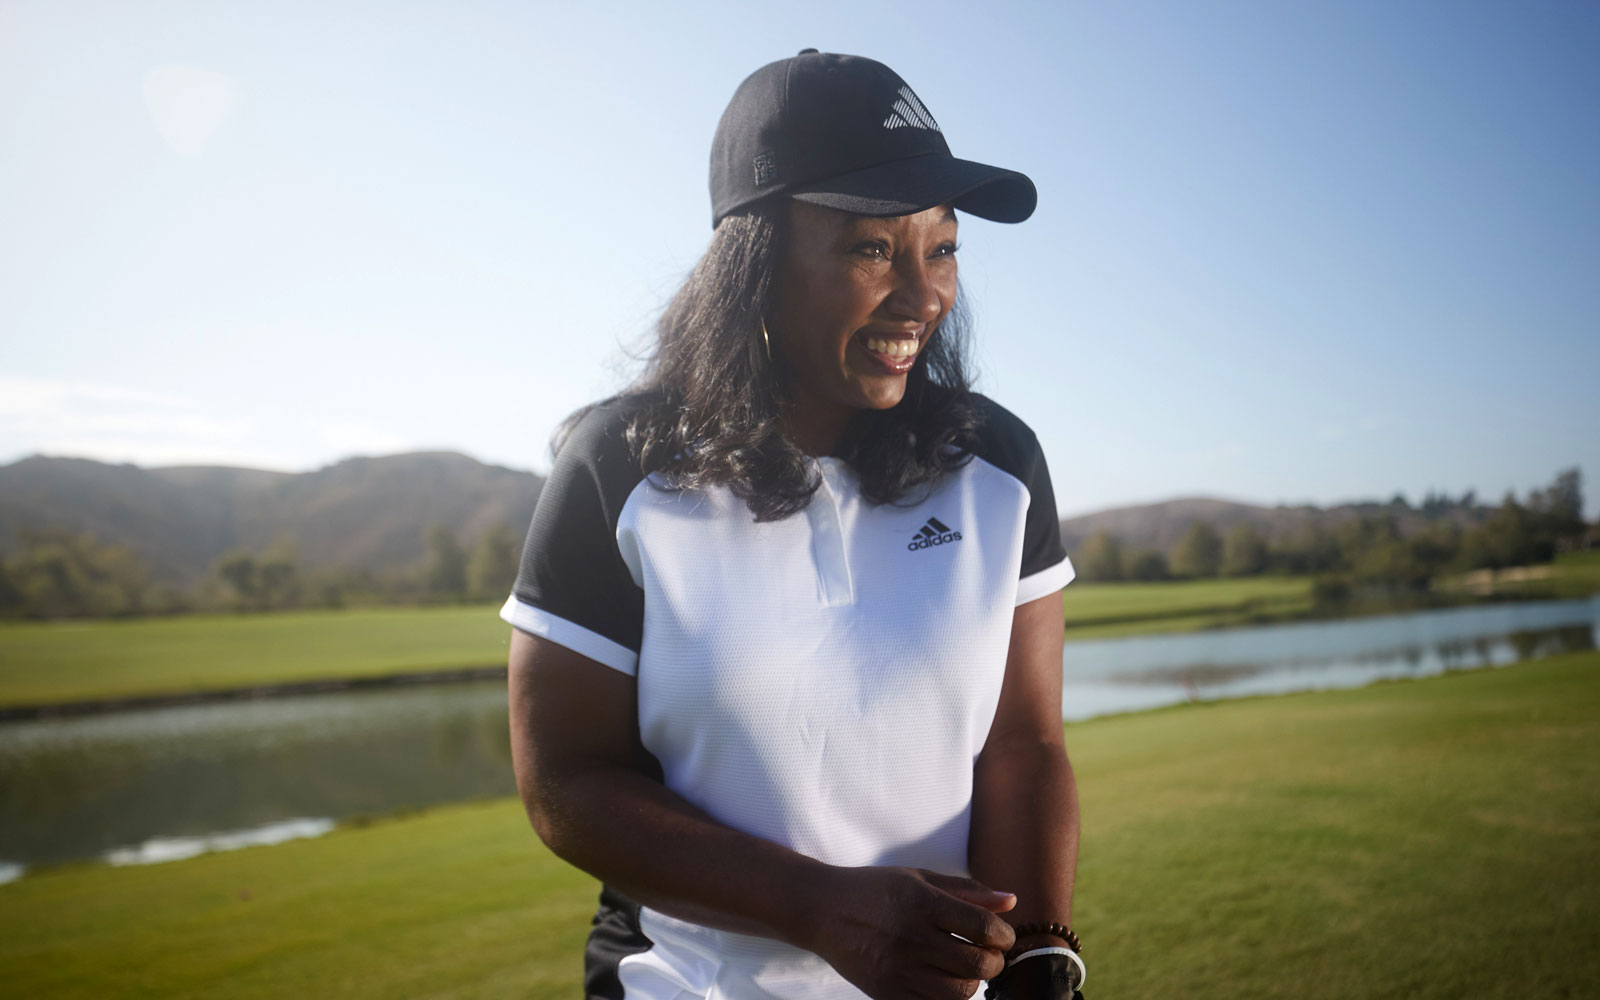 Tiffany Mac Fitzgerald excels the sport of golf for women